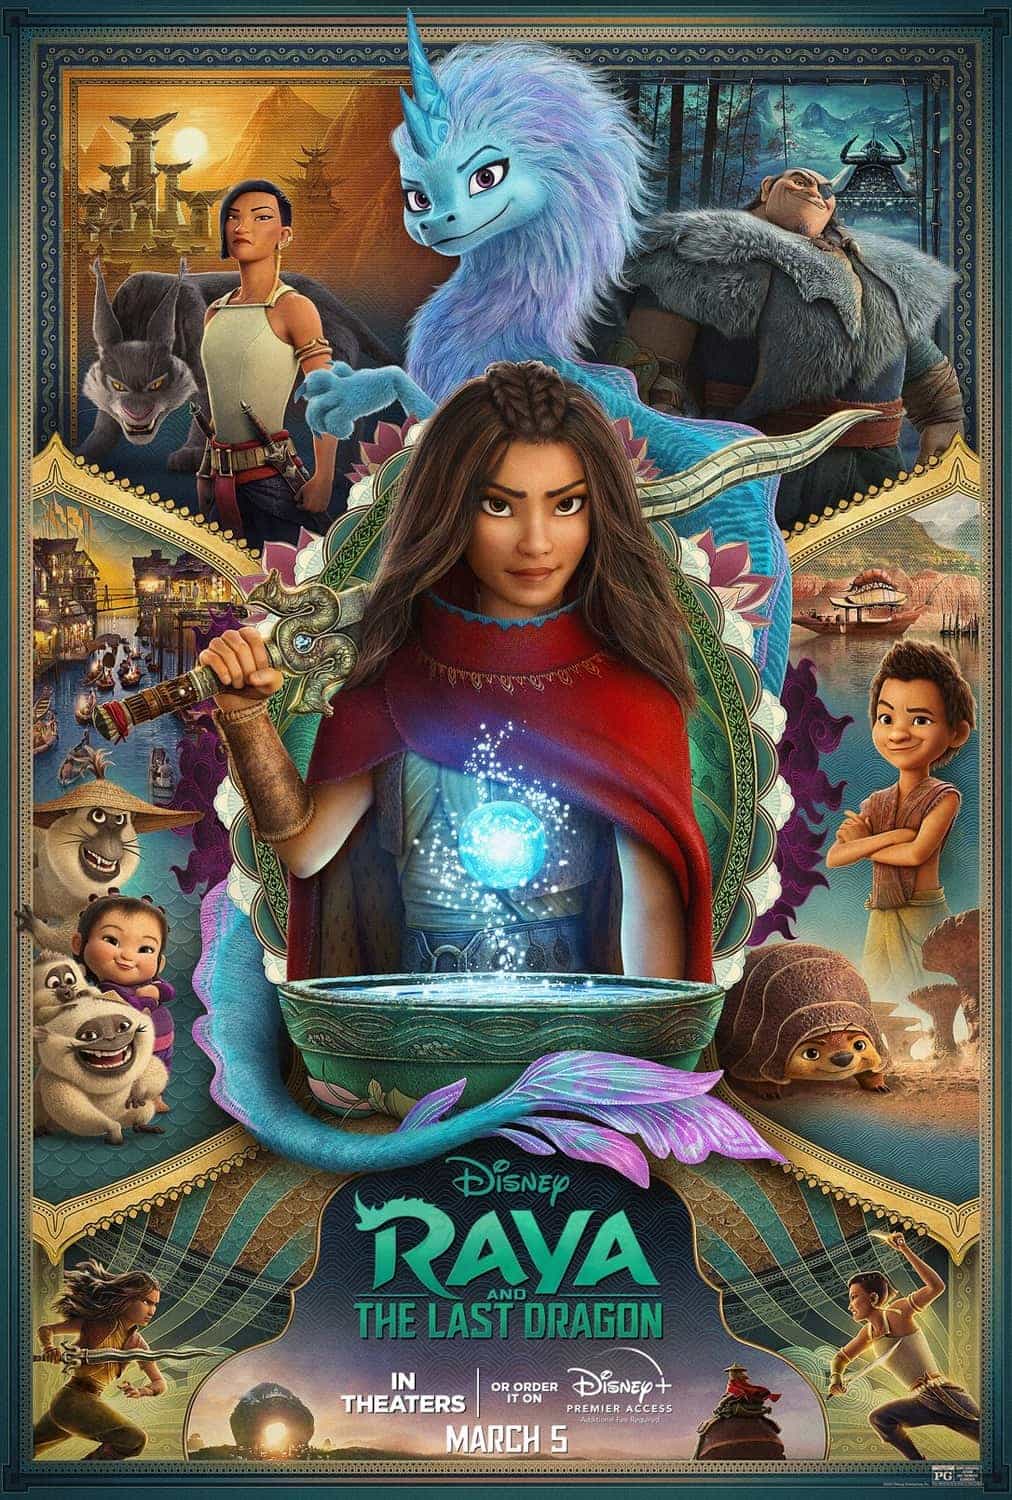 Disney release the first trailer for Raya And The Last Dragon starring Kelly Marie Tran